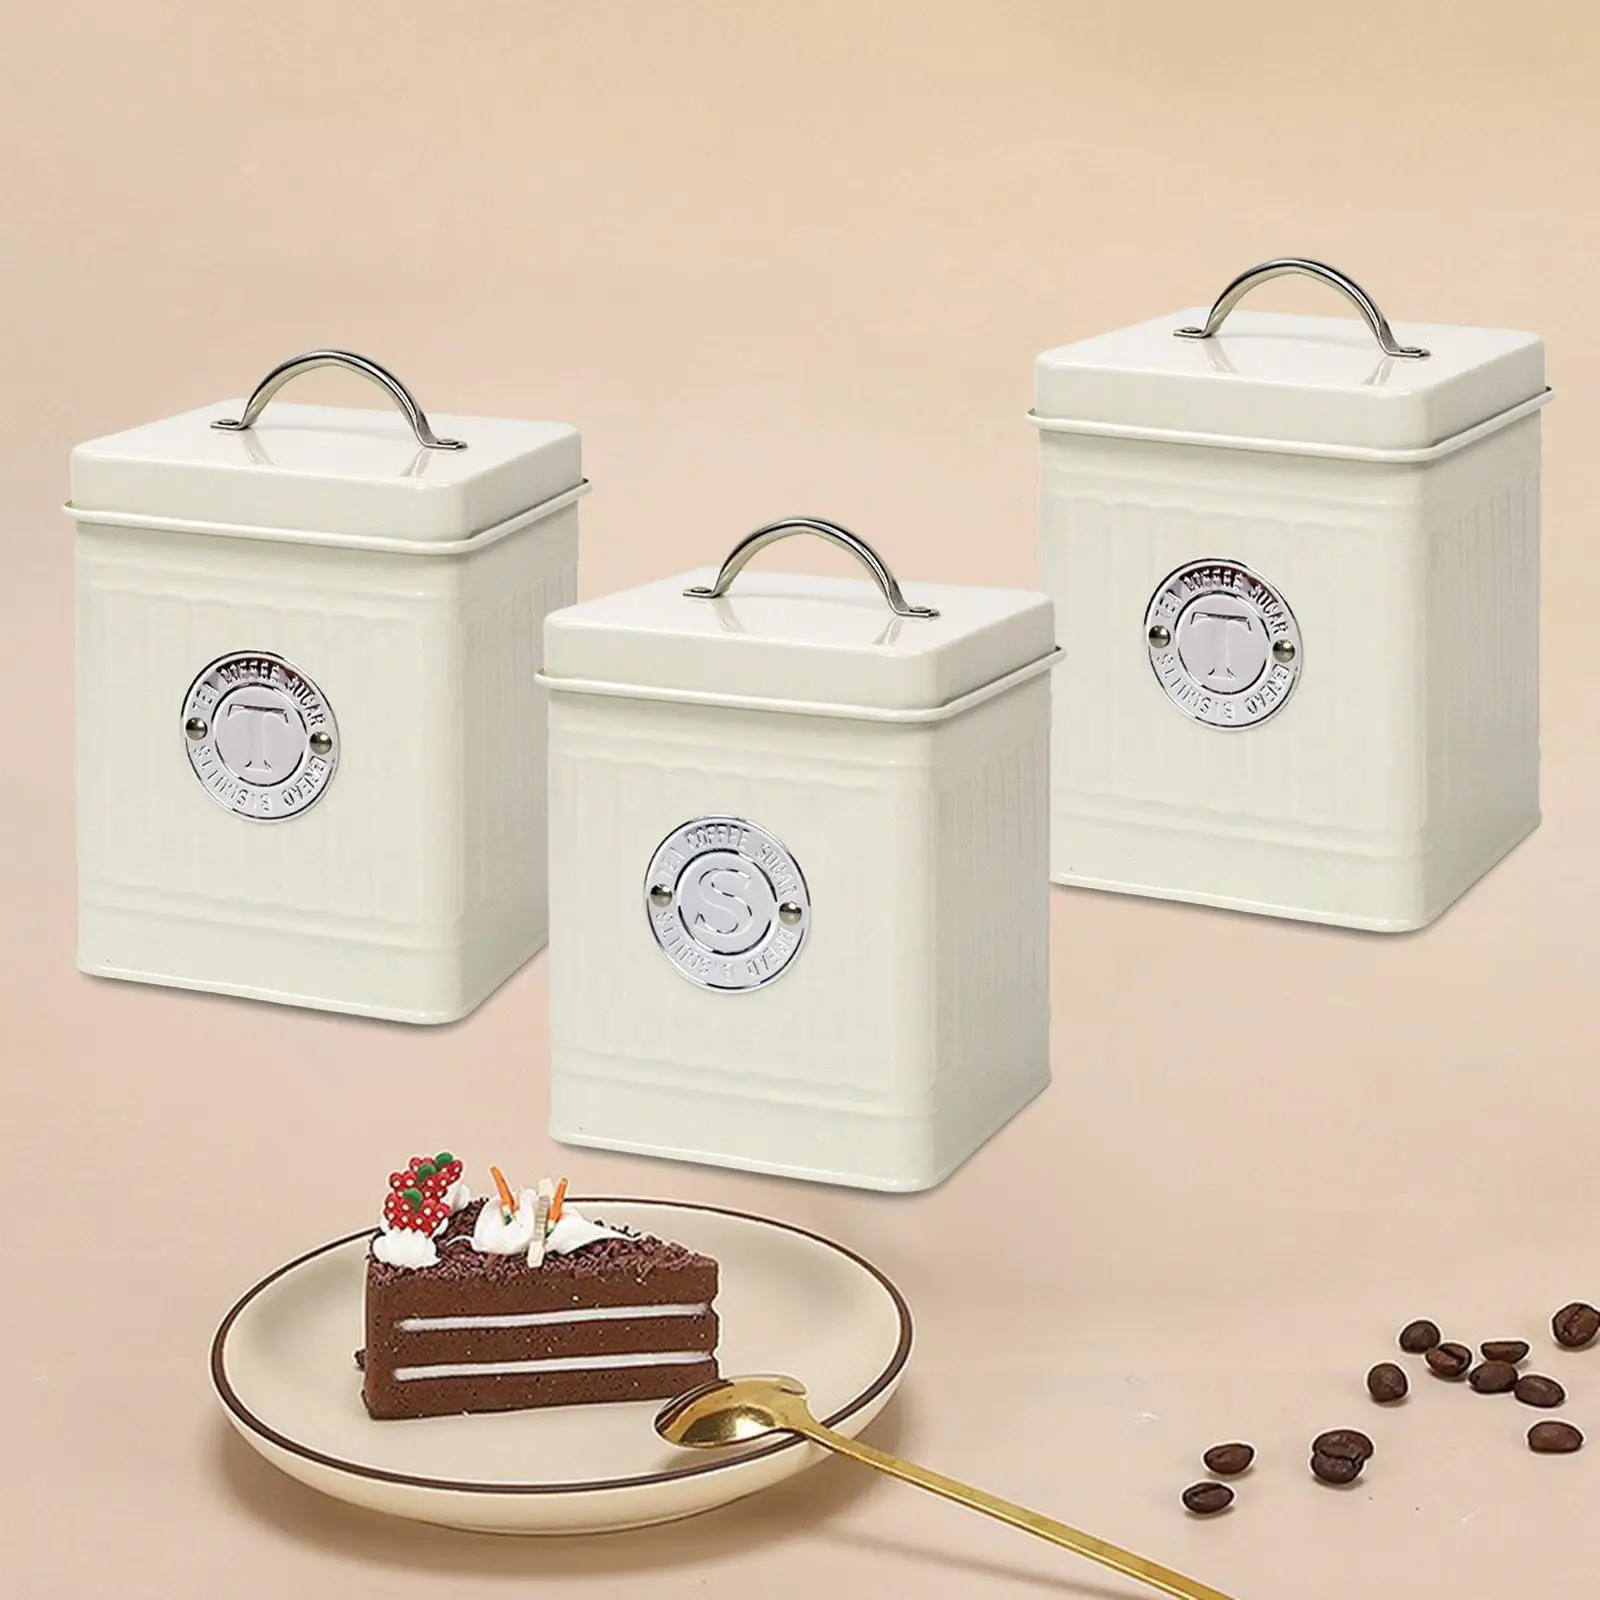 3x Decorative Kitchen Canisters with Lids 4.53x4.53x5.51inch 1.5L Square Case Tea Sugar Coffee Container for Kitchen Cafe Office